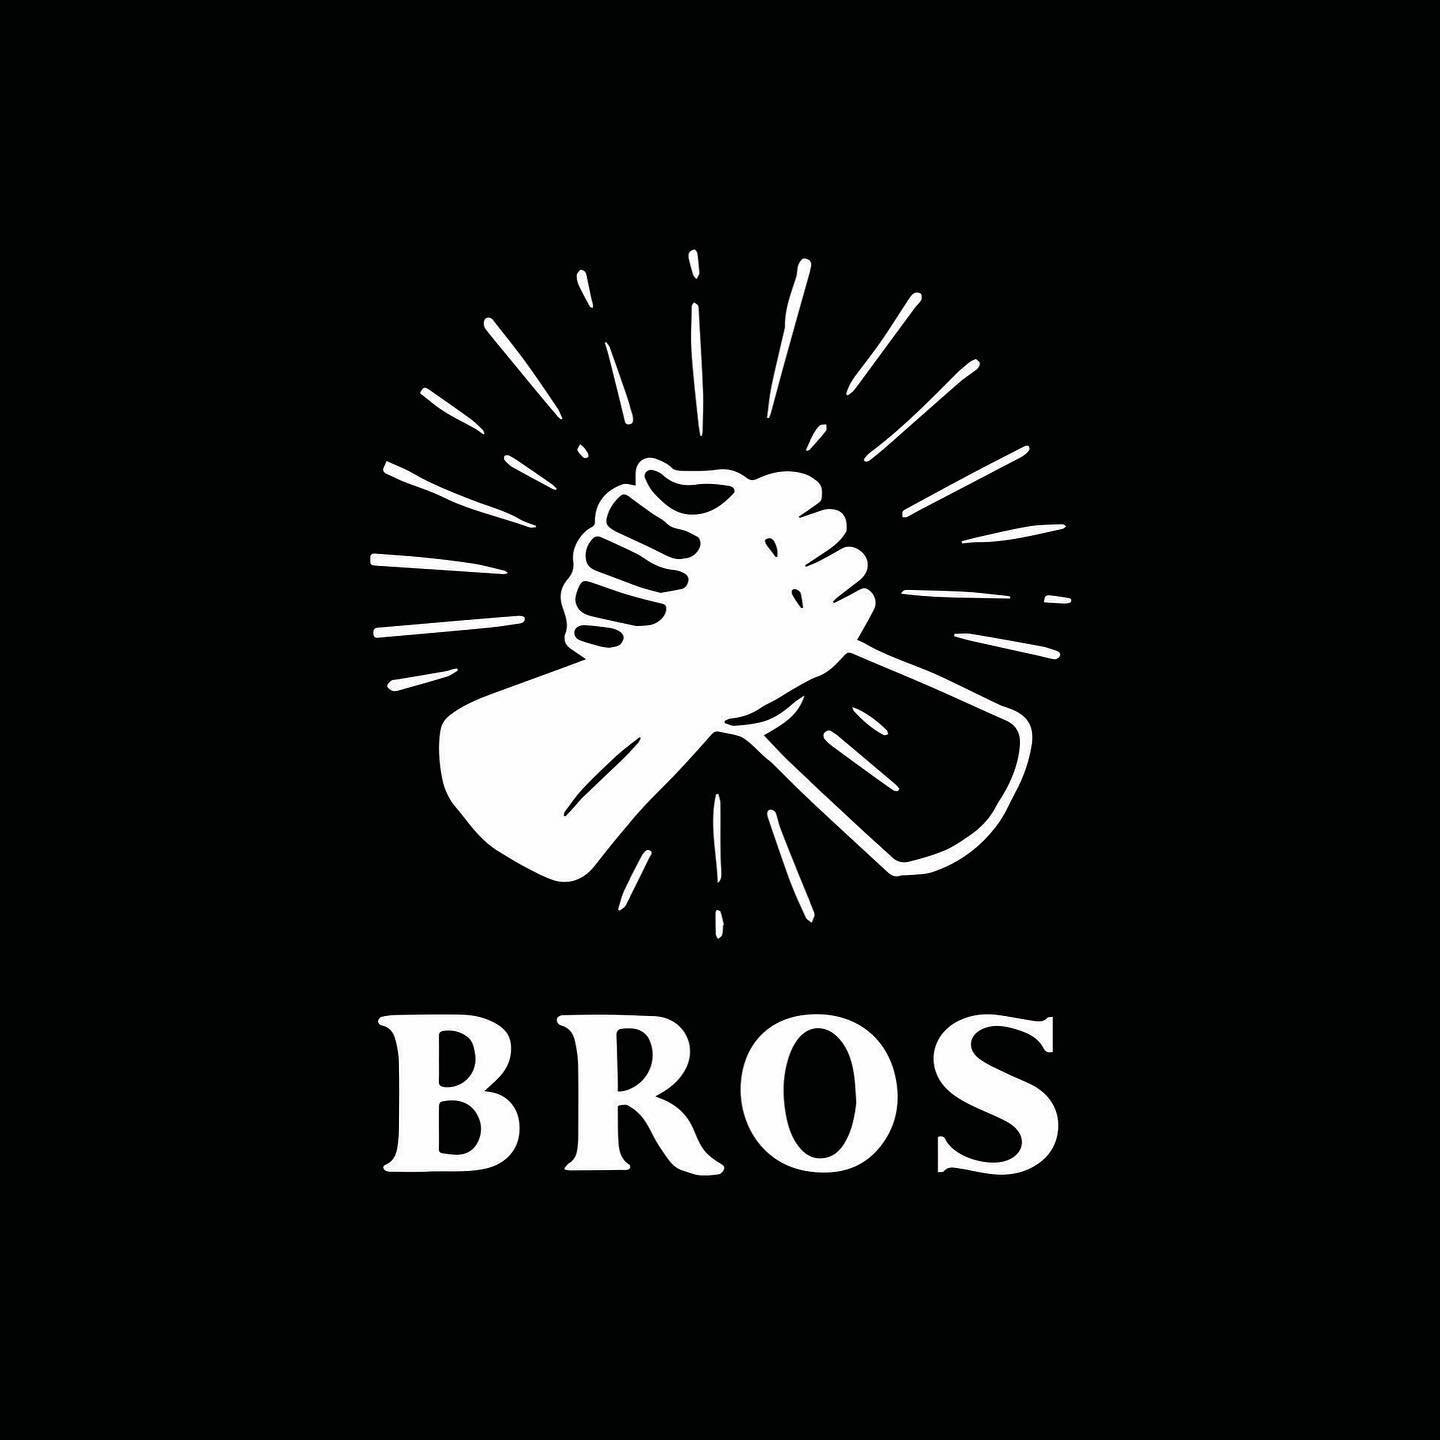 Welcome to the new evolution of BROS 🔥
We&rsquo;re putting out the call, weaving together a movement of connected &amp; empowered men, connected to their primal &amp; divine masculine essence - able to express emotion in a healthy &amp; honest way.
